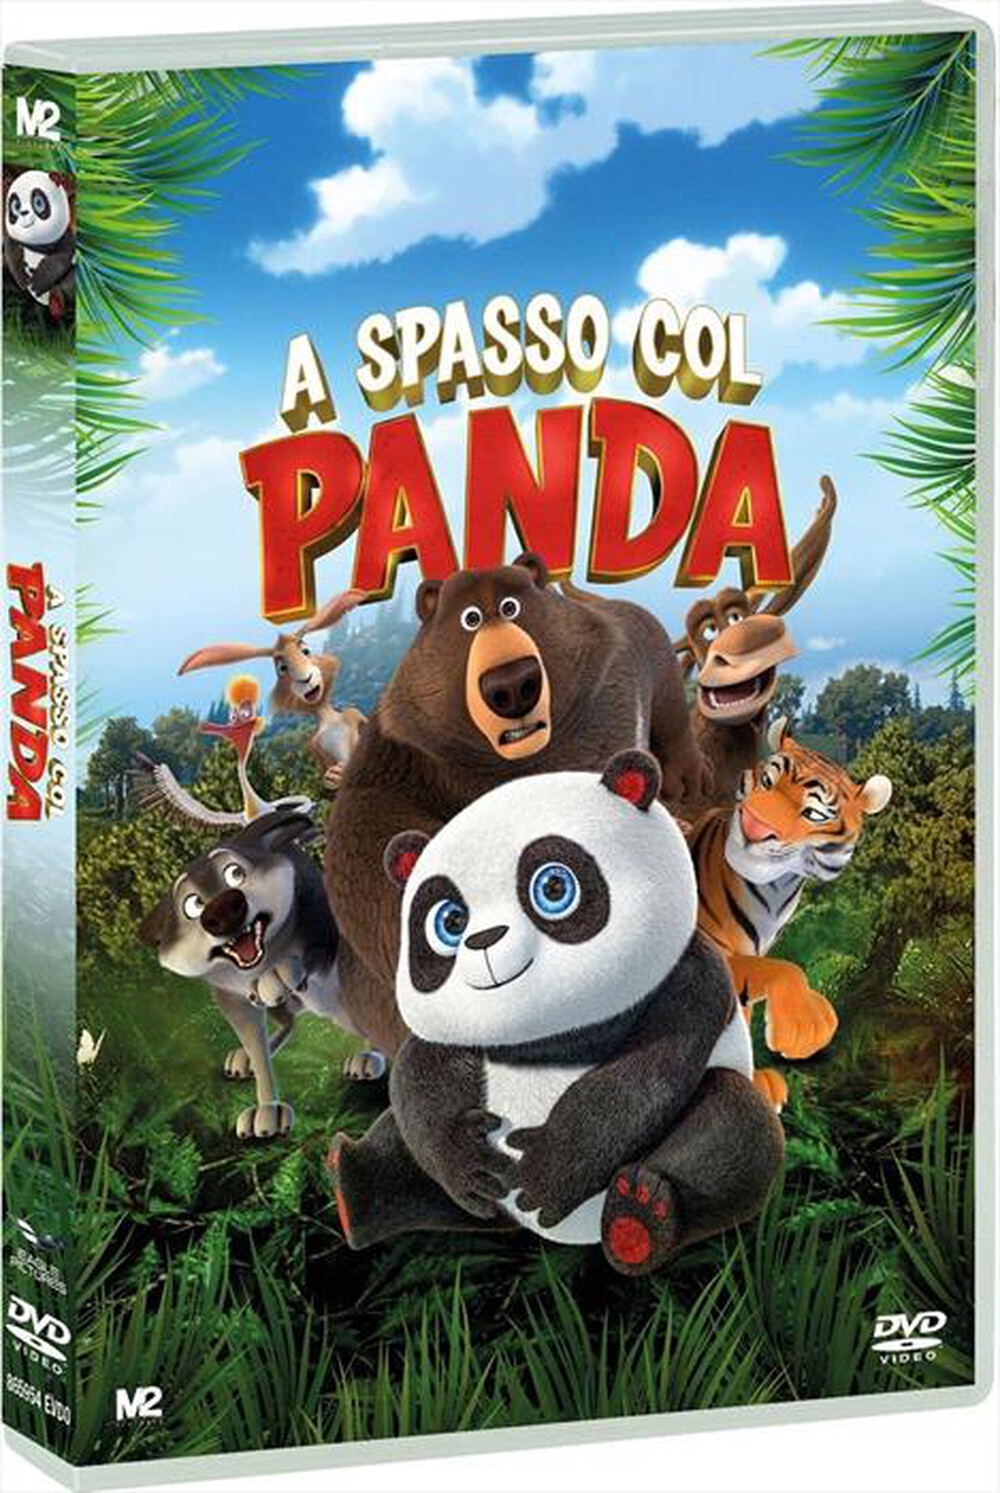 "EAGLE PICTURES - A Spasso Col Panda"